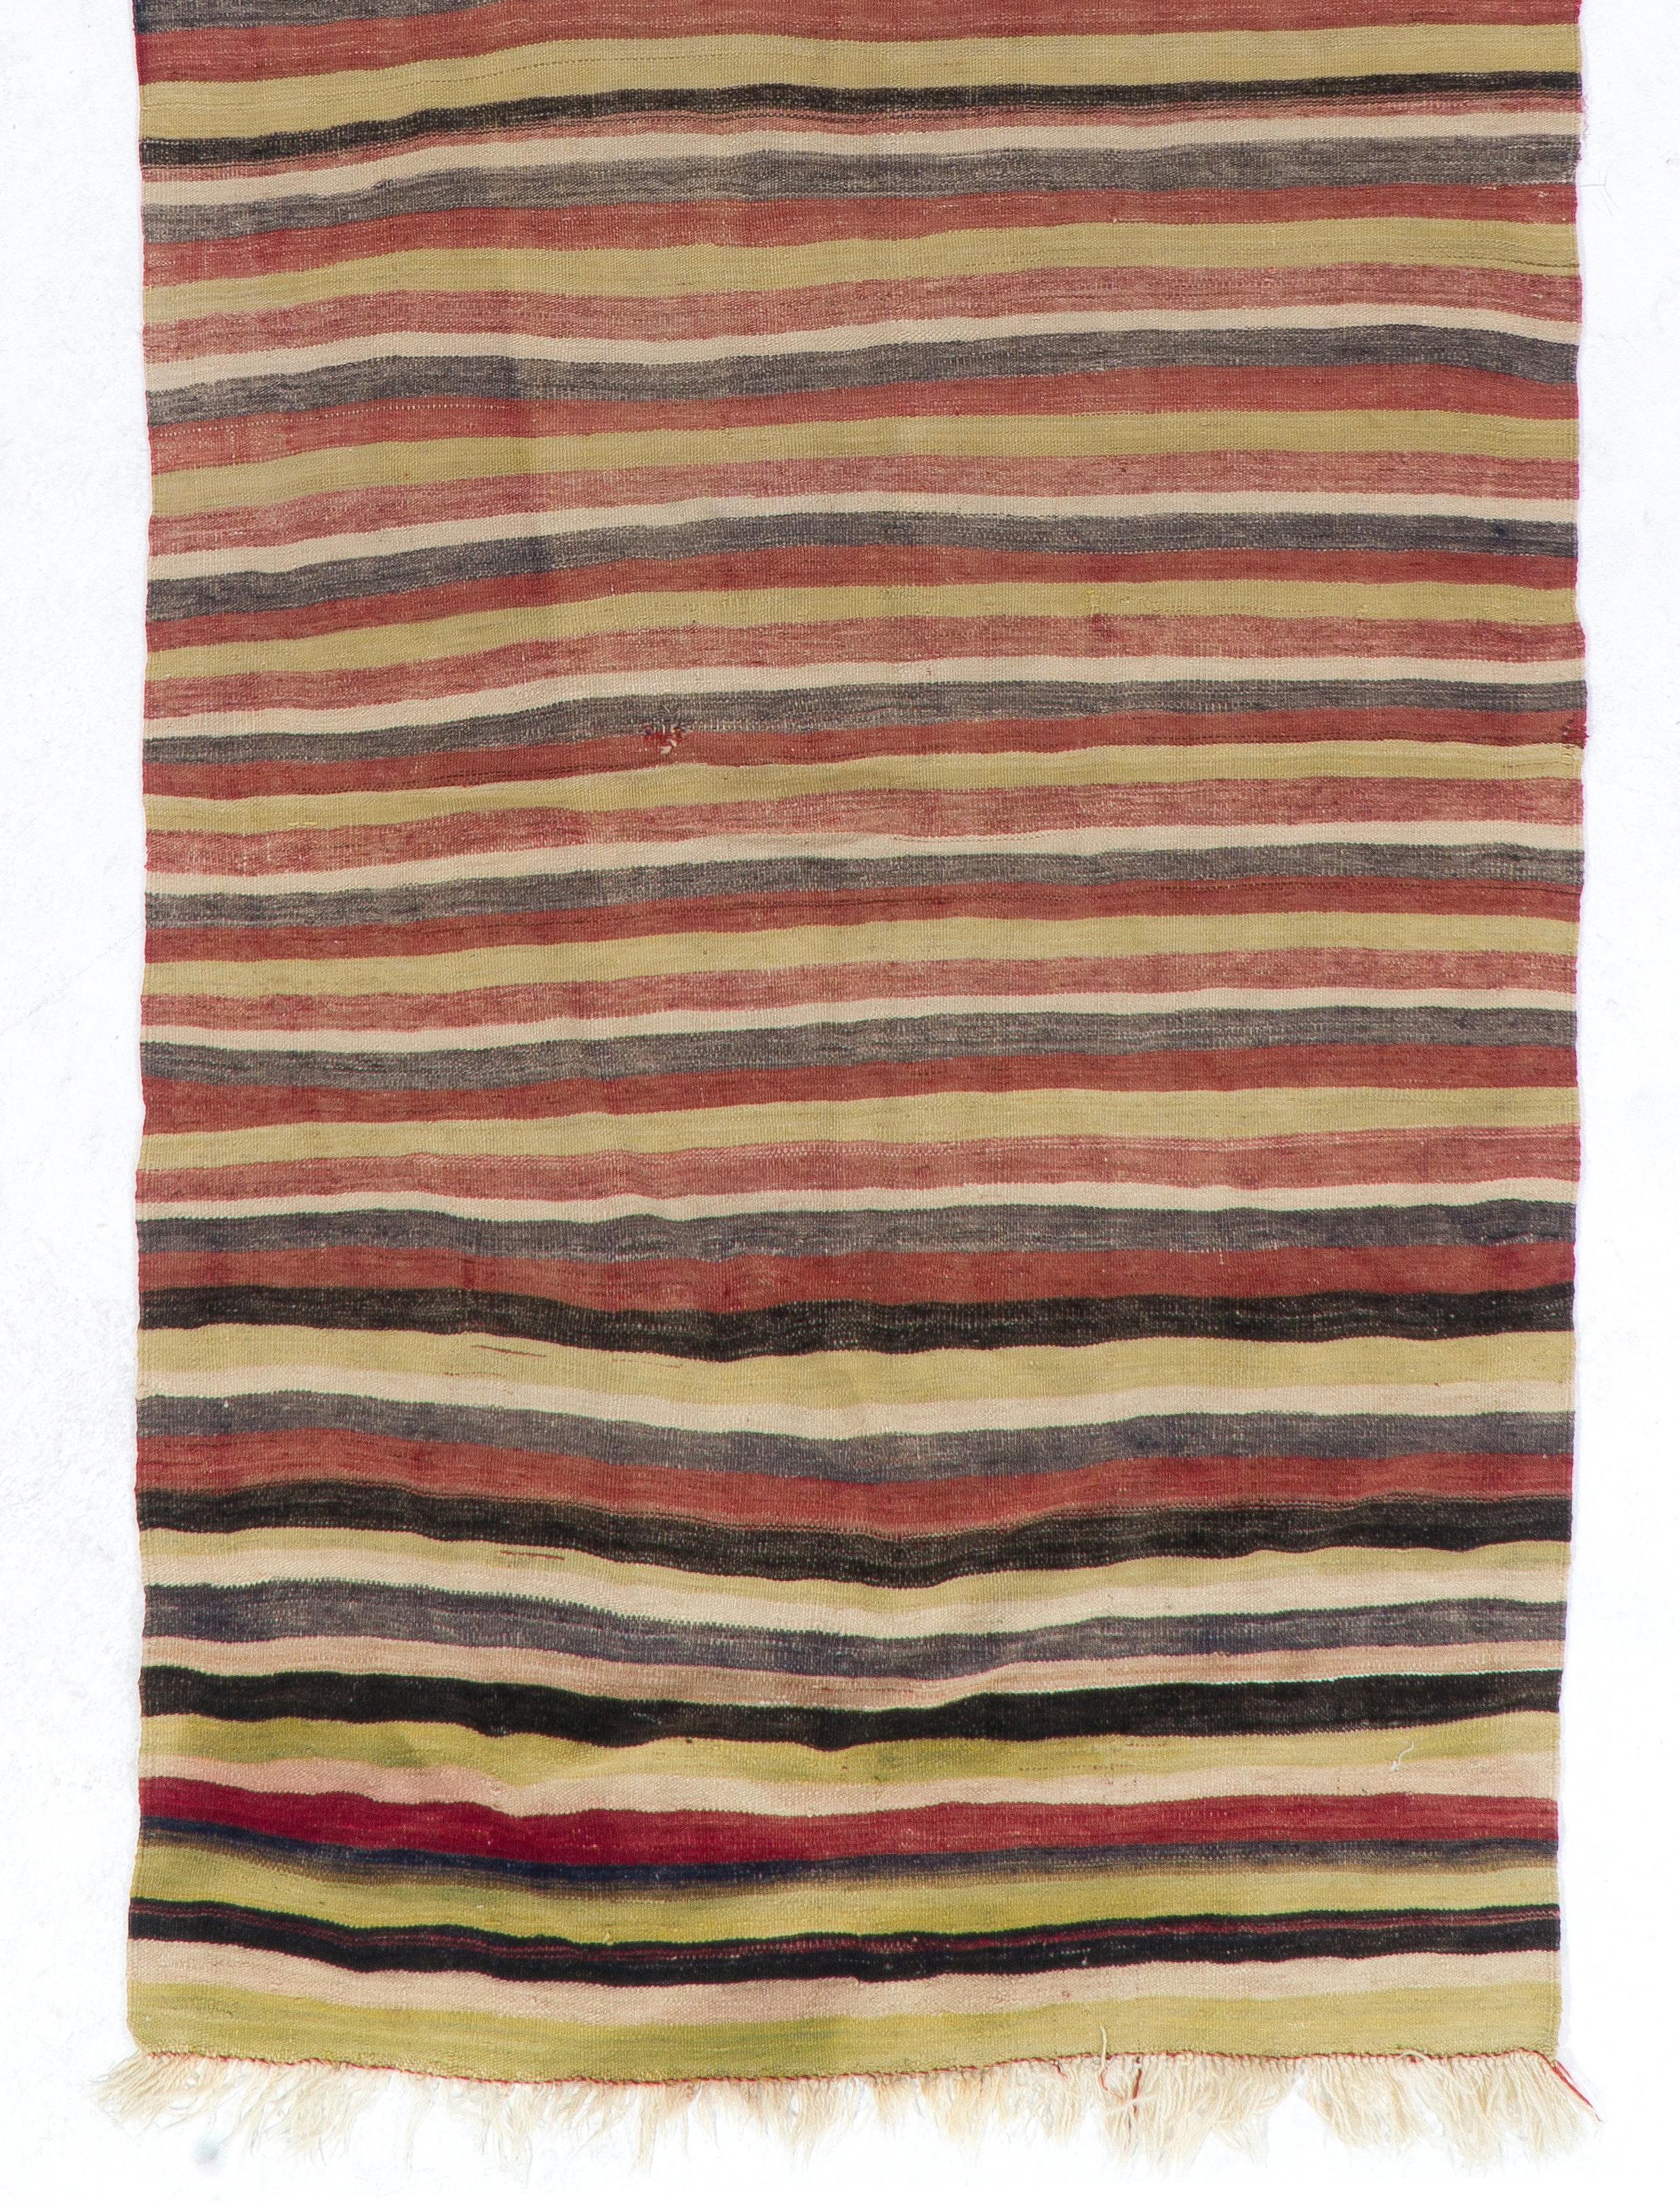 Hand-Woven 4x11 Ft Vintage Handmade Flat-Woven Wool Kilim Runner, Turkish Striped Rug For Sale